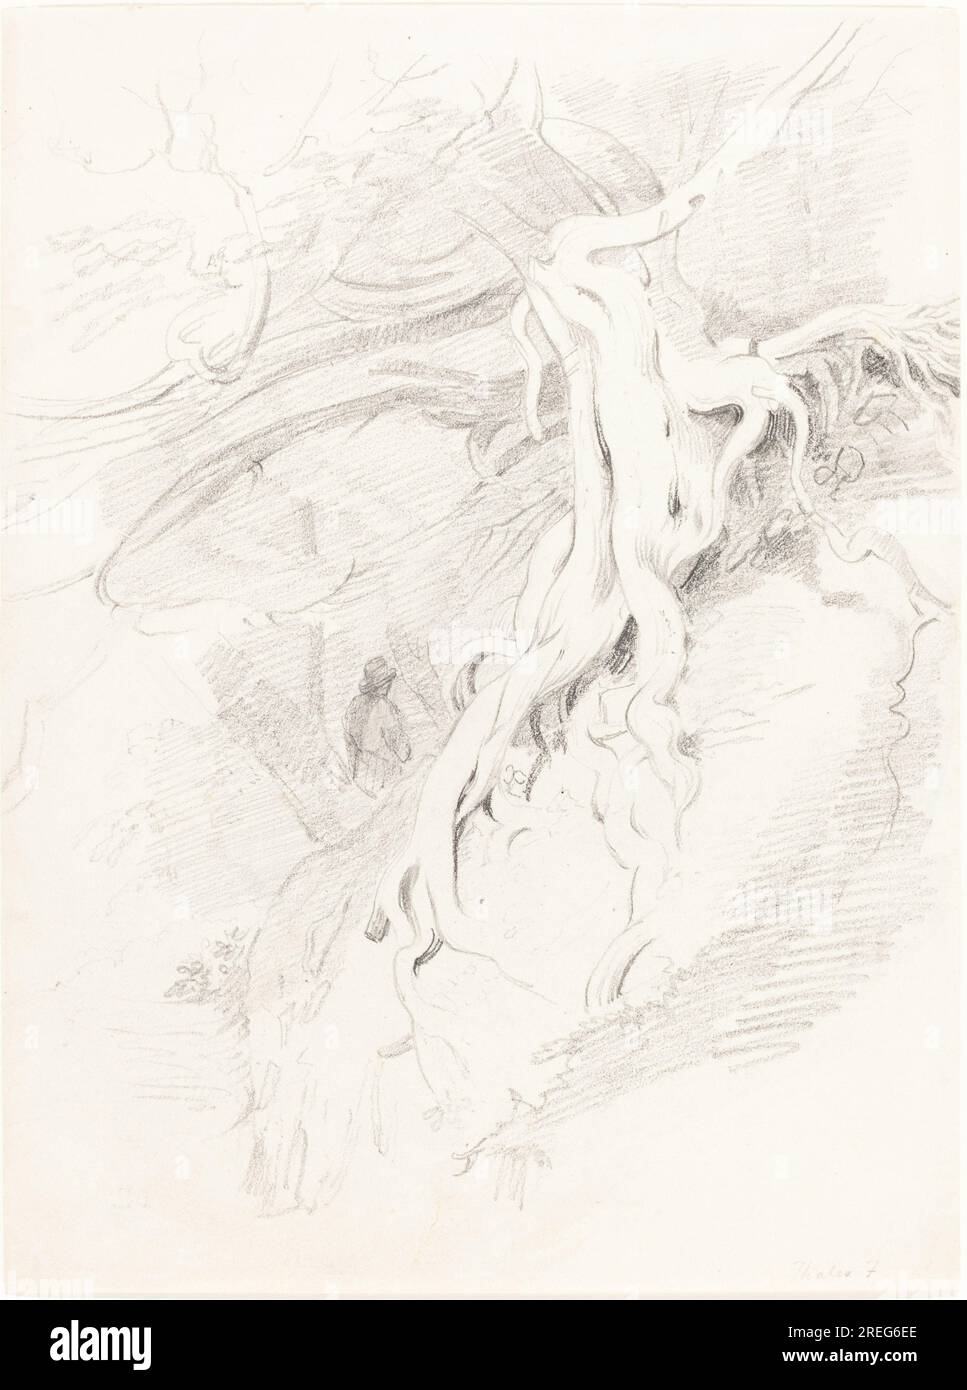 'Thales Fielding, The Yew at Clifton, 0, graphite on wove paper, overall: 26.7 x 19.9 cm (10 1/2 x 7 13/16 in.), Gift of William B. O'Neal, 1995.52.49' Stock Photo